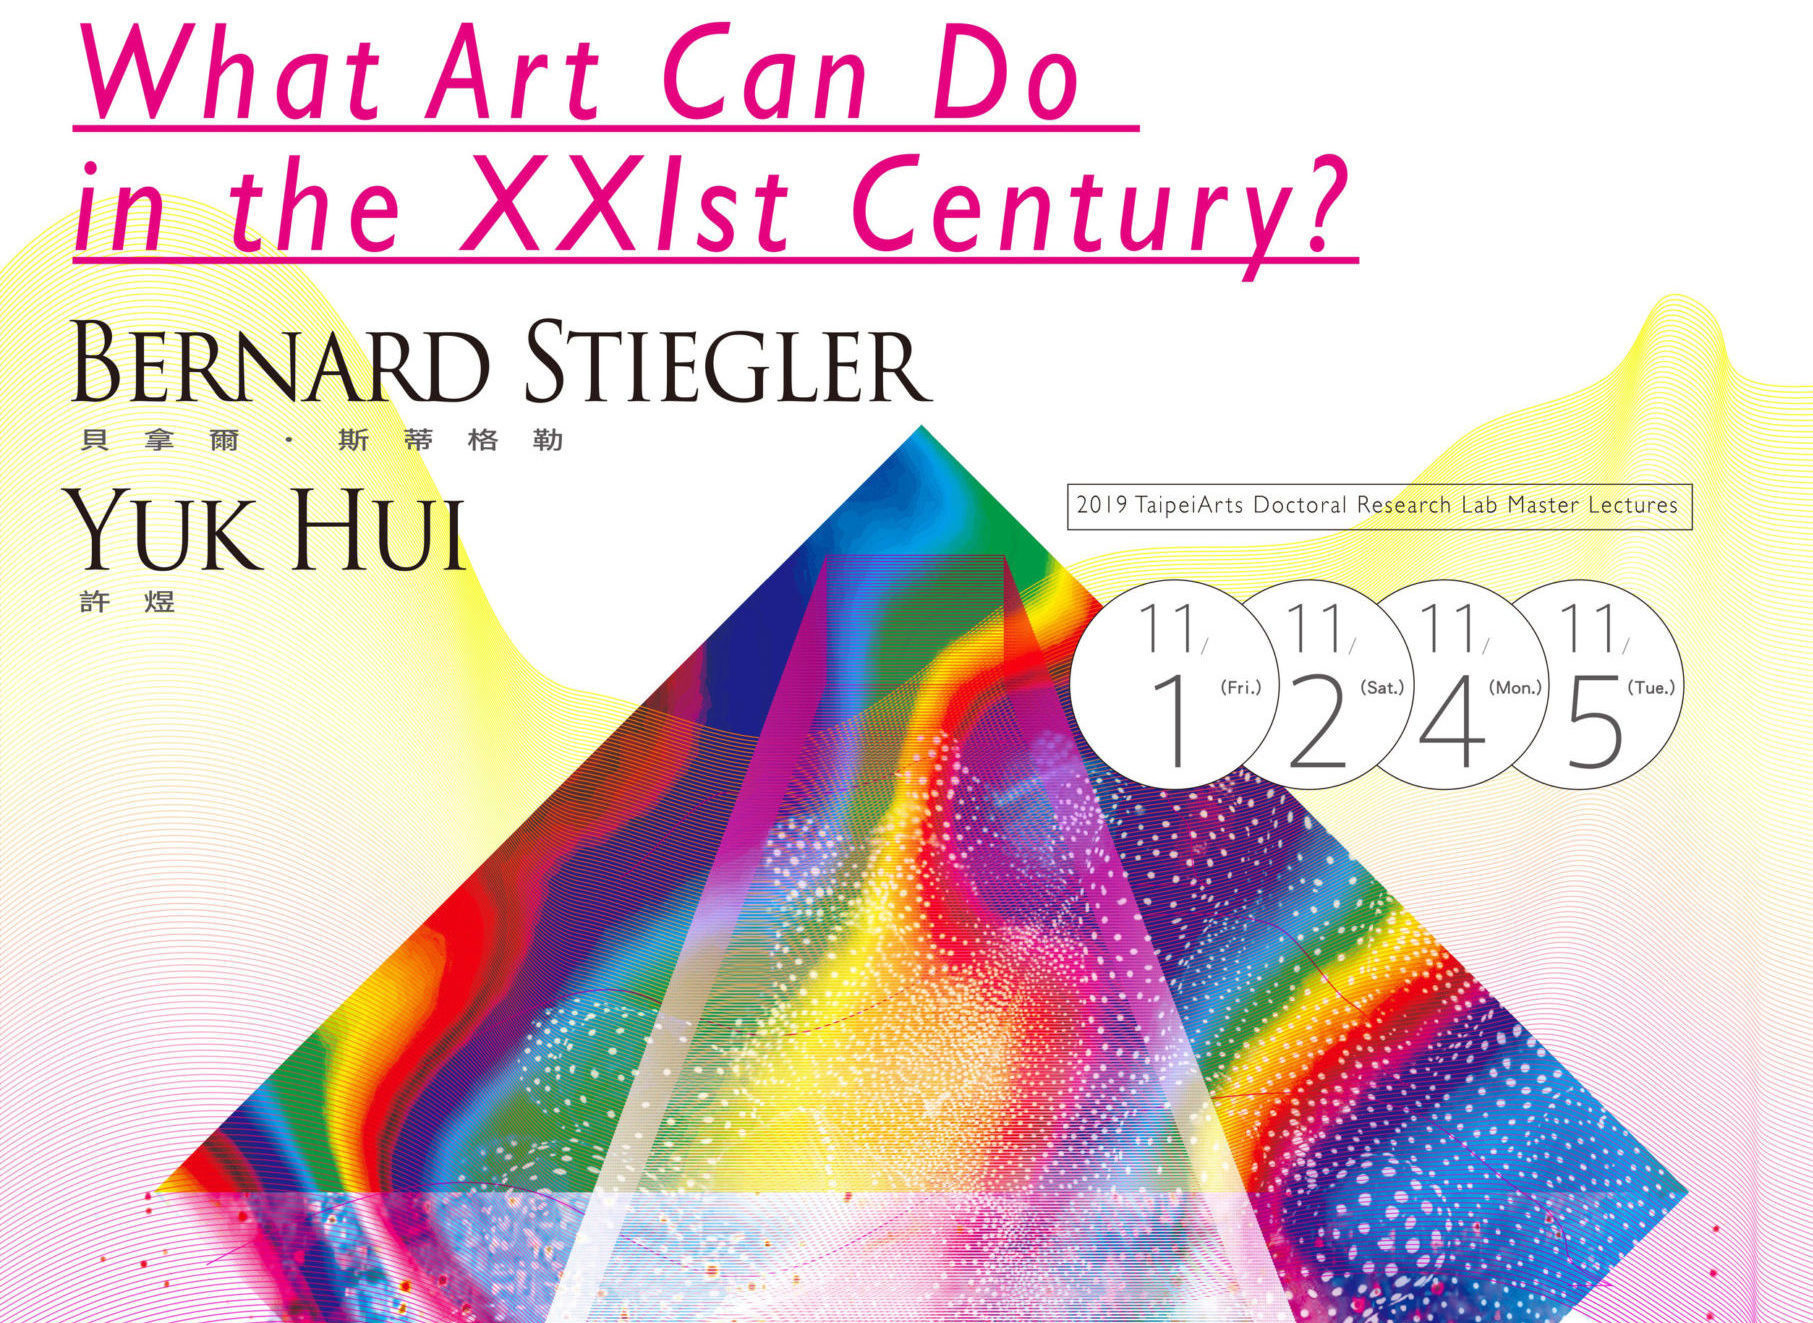 2019 TAD Lab Master Lectures – What Art Can Do in the XXIst Century?